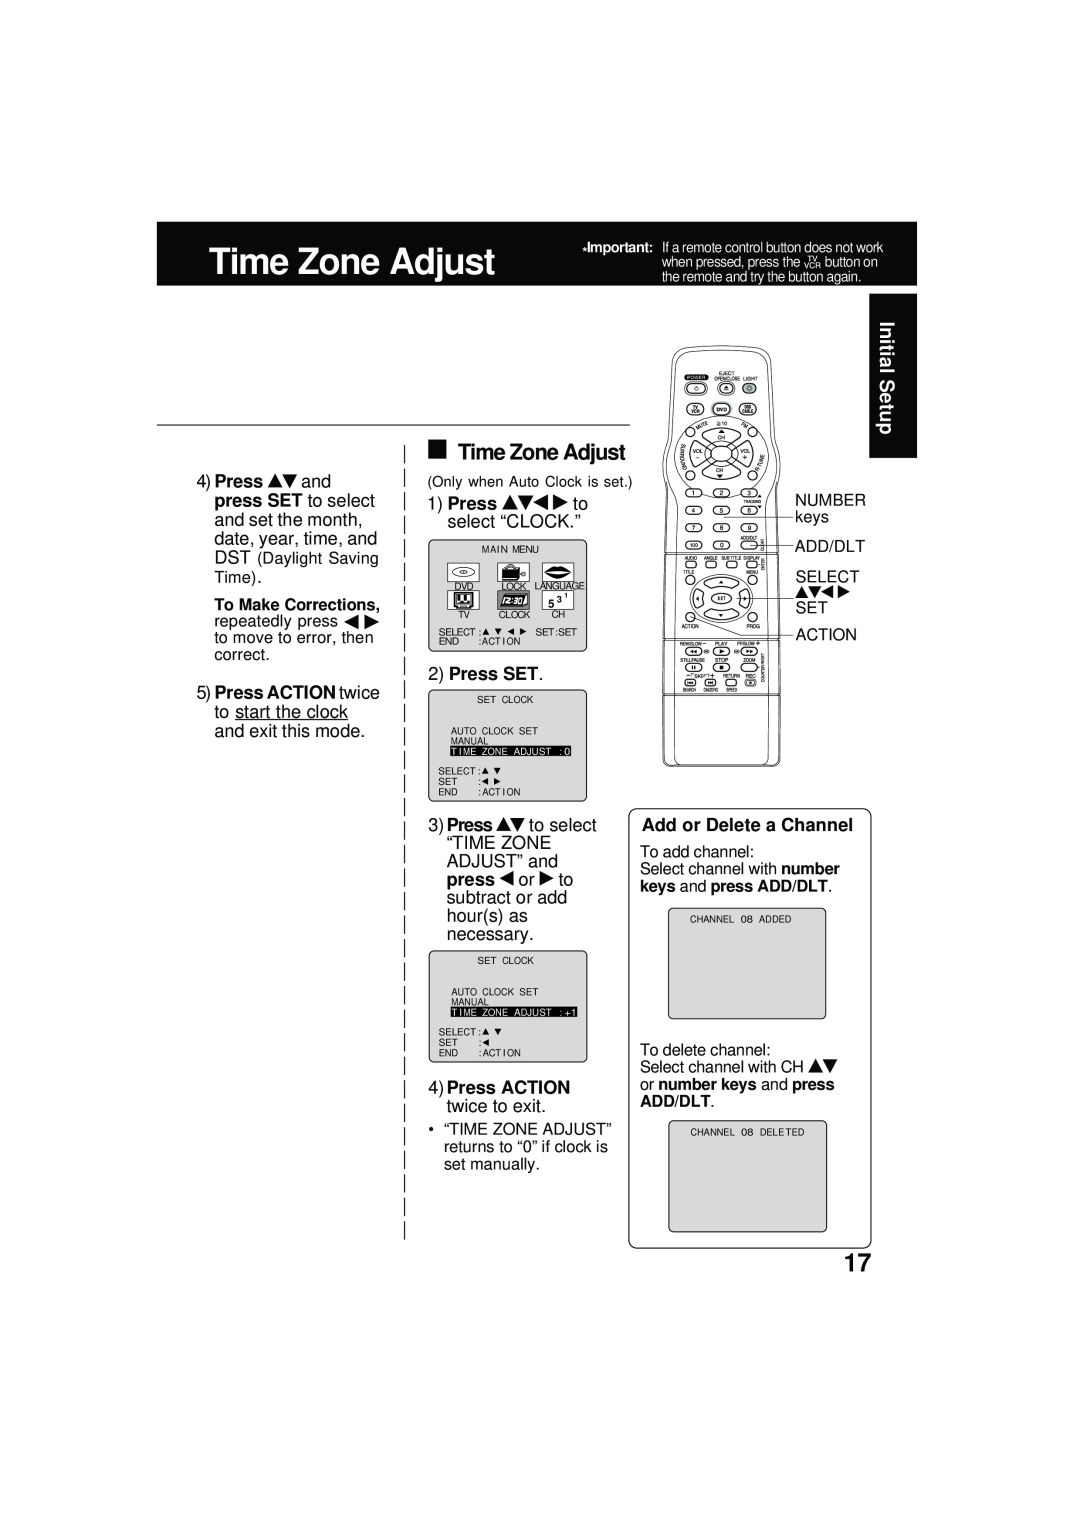 Panasonic PV DM2092 Time Zone Adjust, Press ACTION twice to start the clock and exit this mode, select “CLOCK.”, press or 